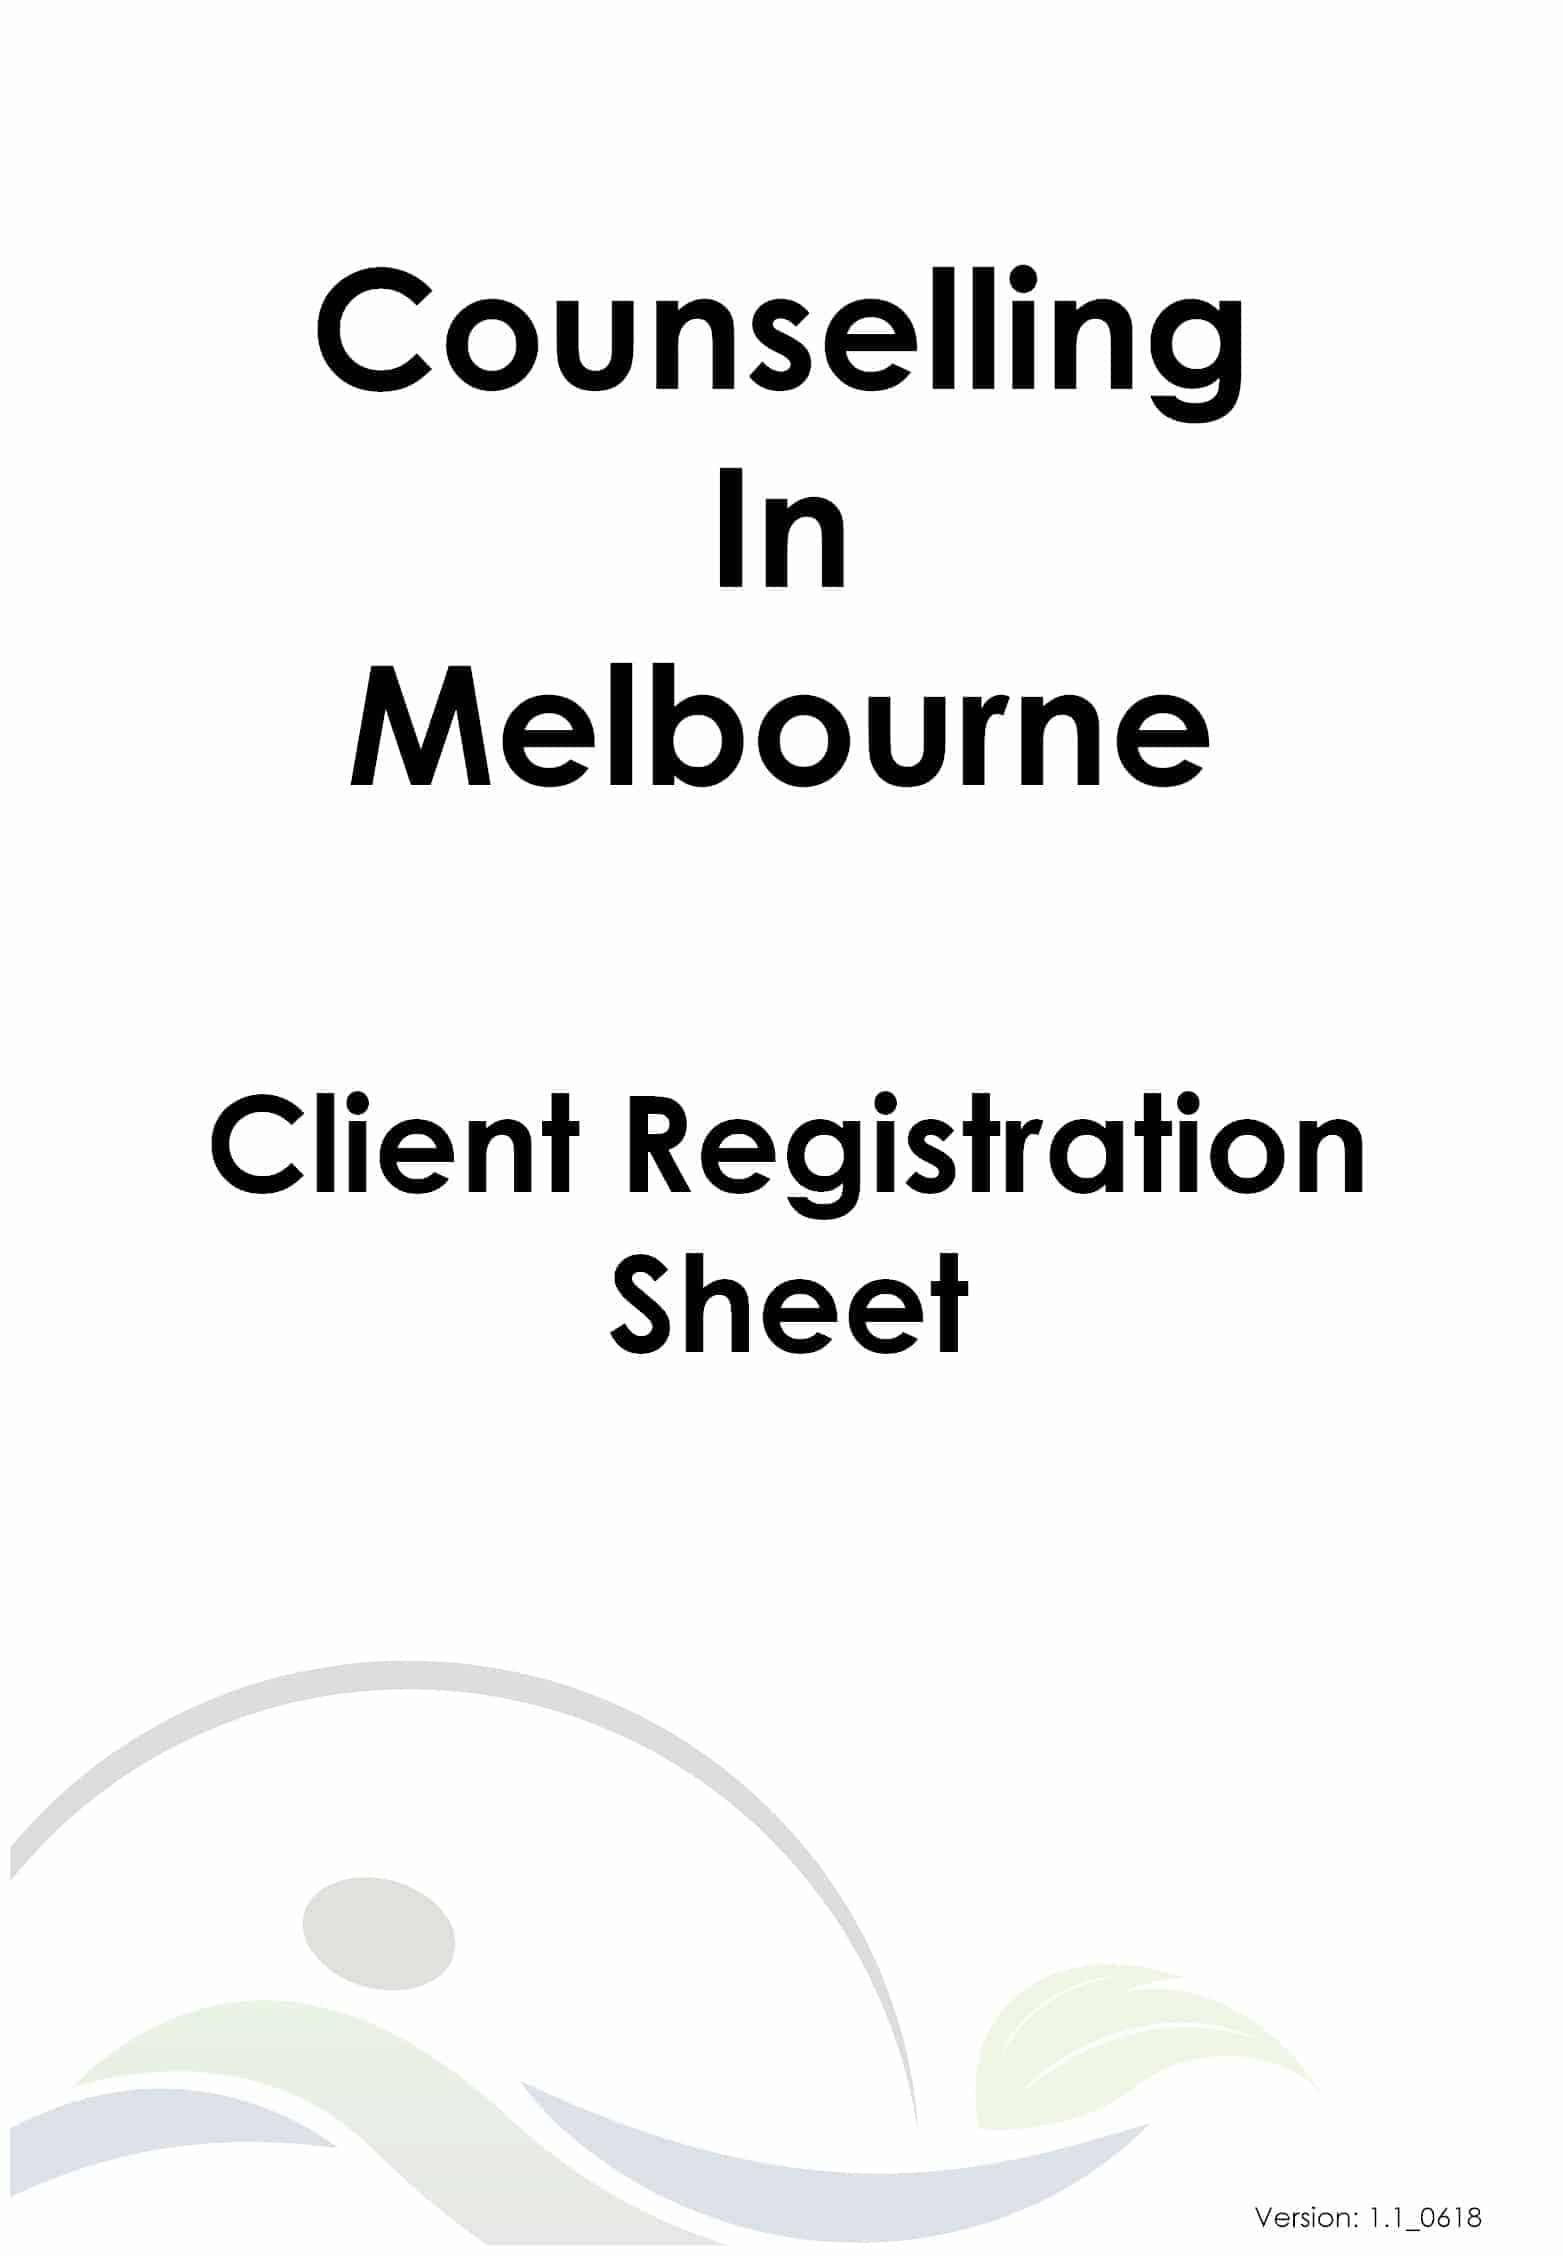 Counselling in Melbourne Client Registration Sheet